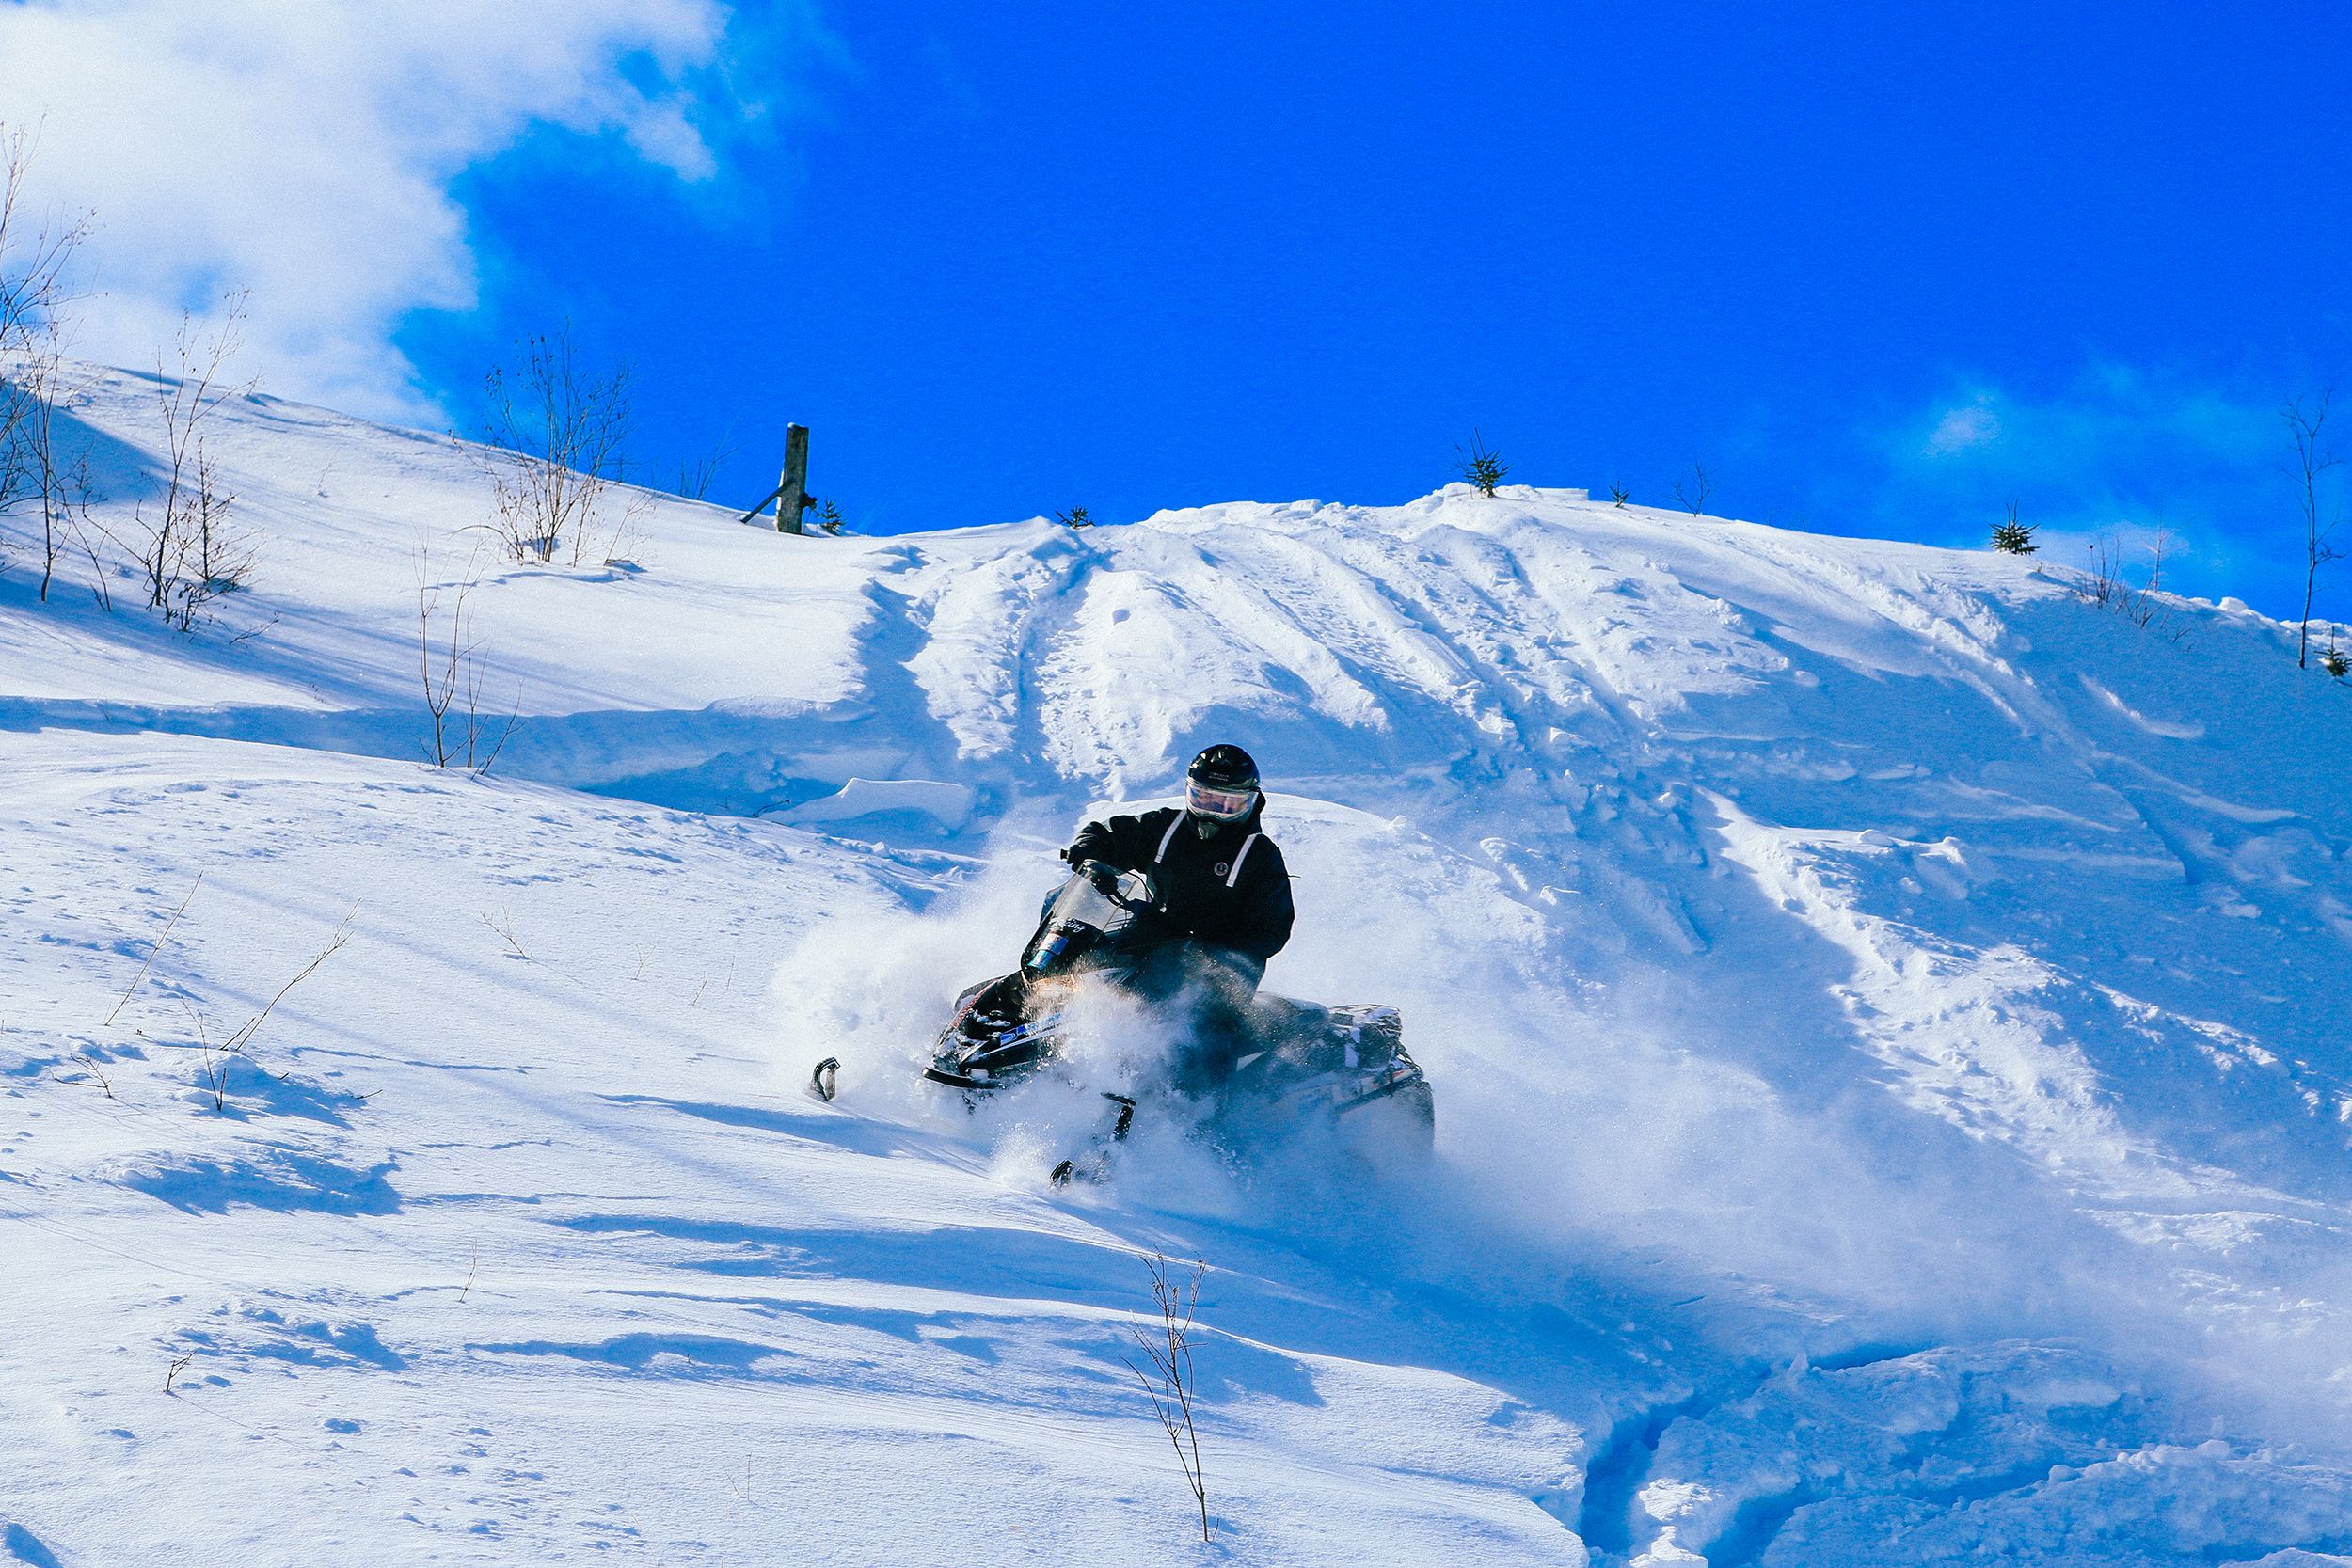 A rider on a snowmobile crossing a steep hill covered in soft powdery snow that flies up around it. The sky above is bright blue.